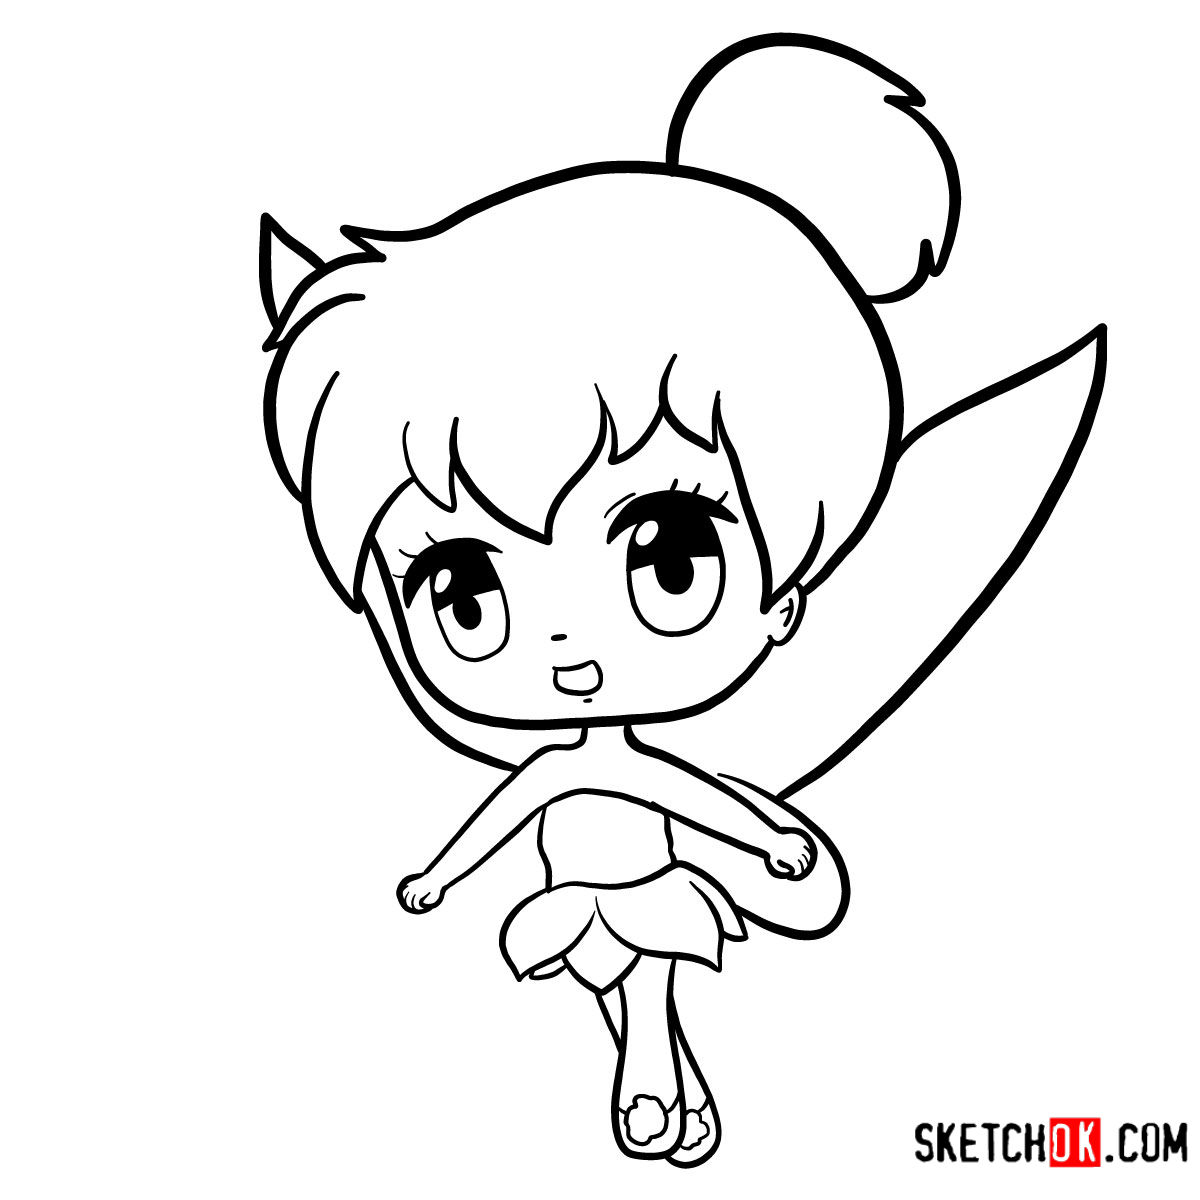 How to draw Tinker Bell chibi